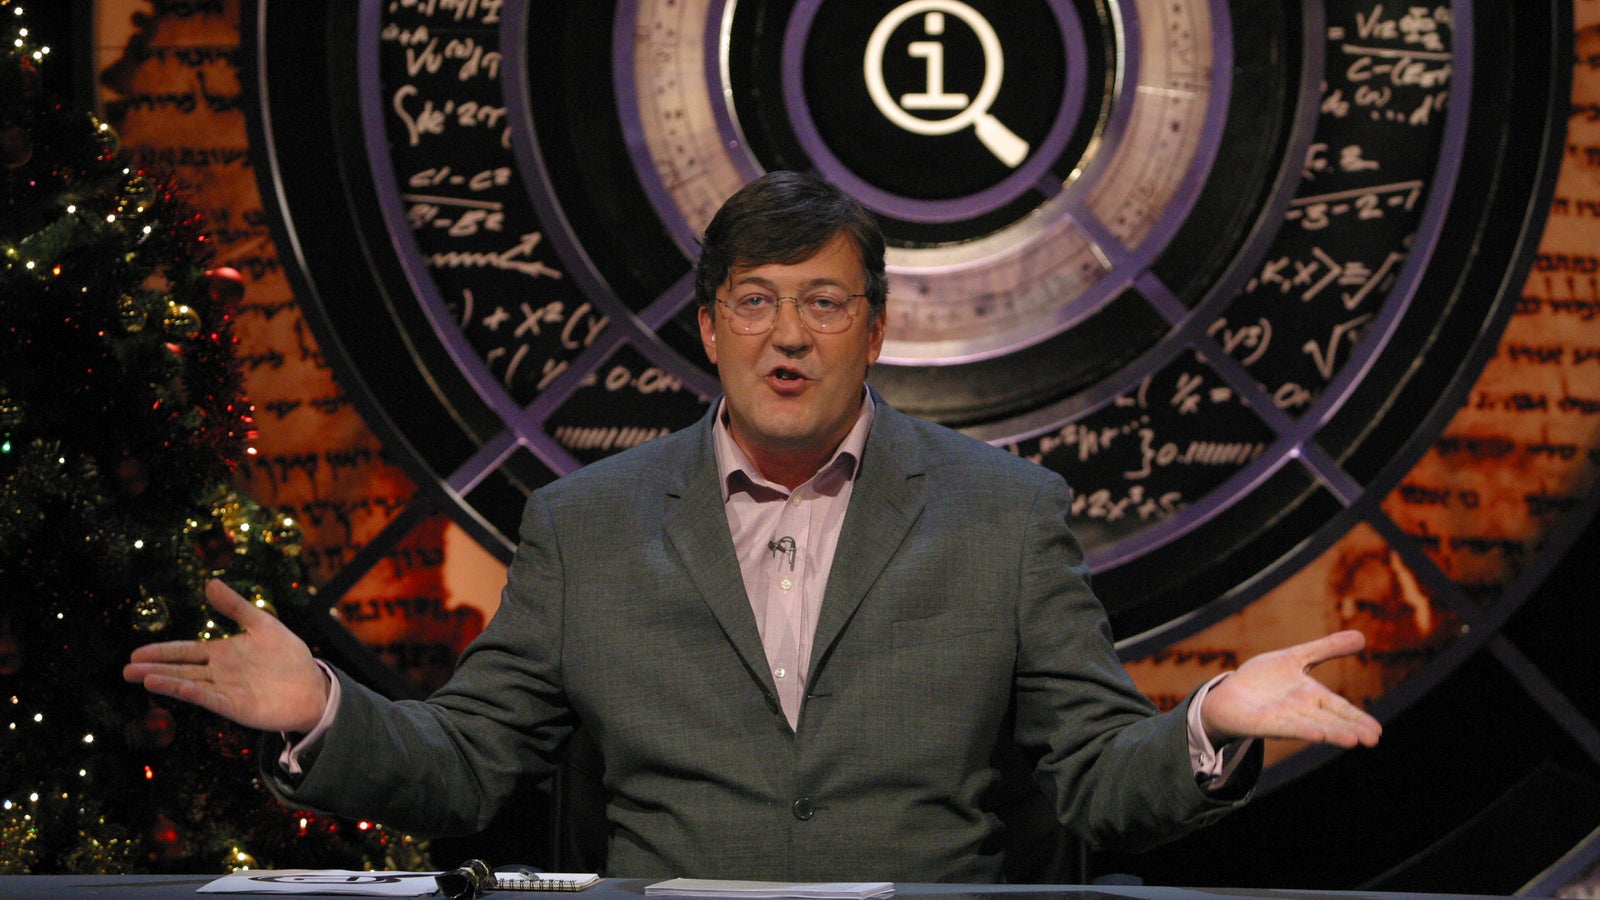 Fry has announced that he is stepping down as the host of QI